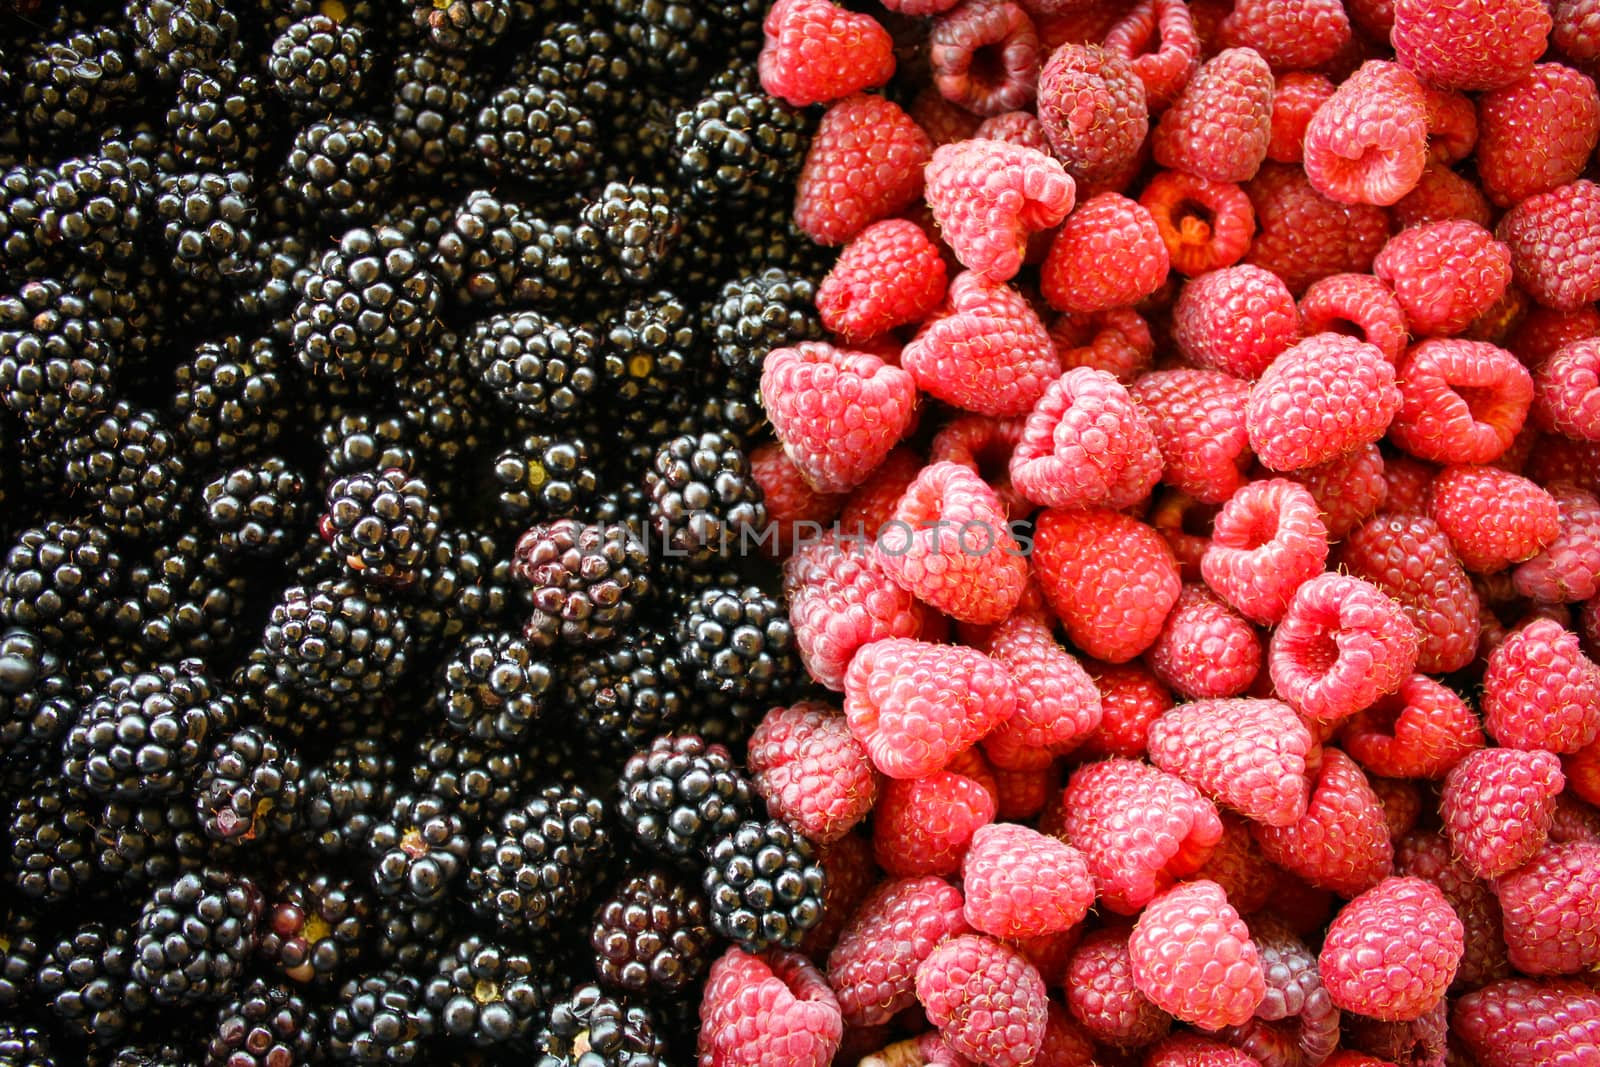 Full frame shot of the blackberries and raspberries. Left side of blackberries, and right side raspberries. by mahirrov